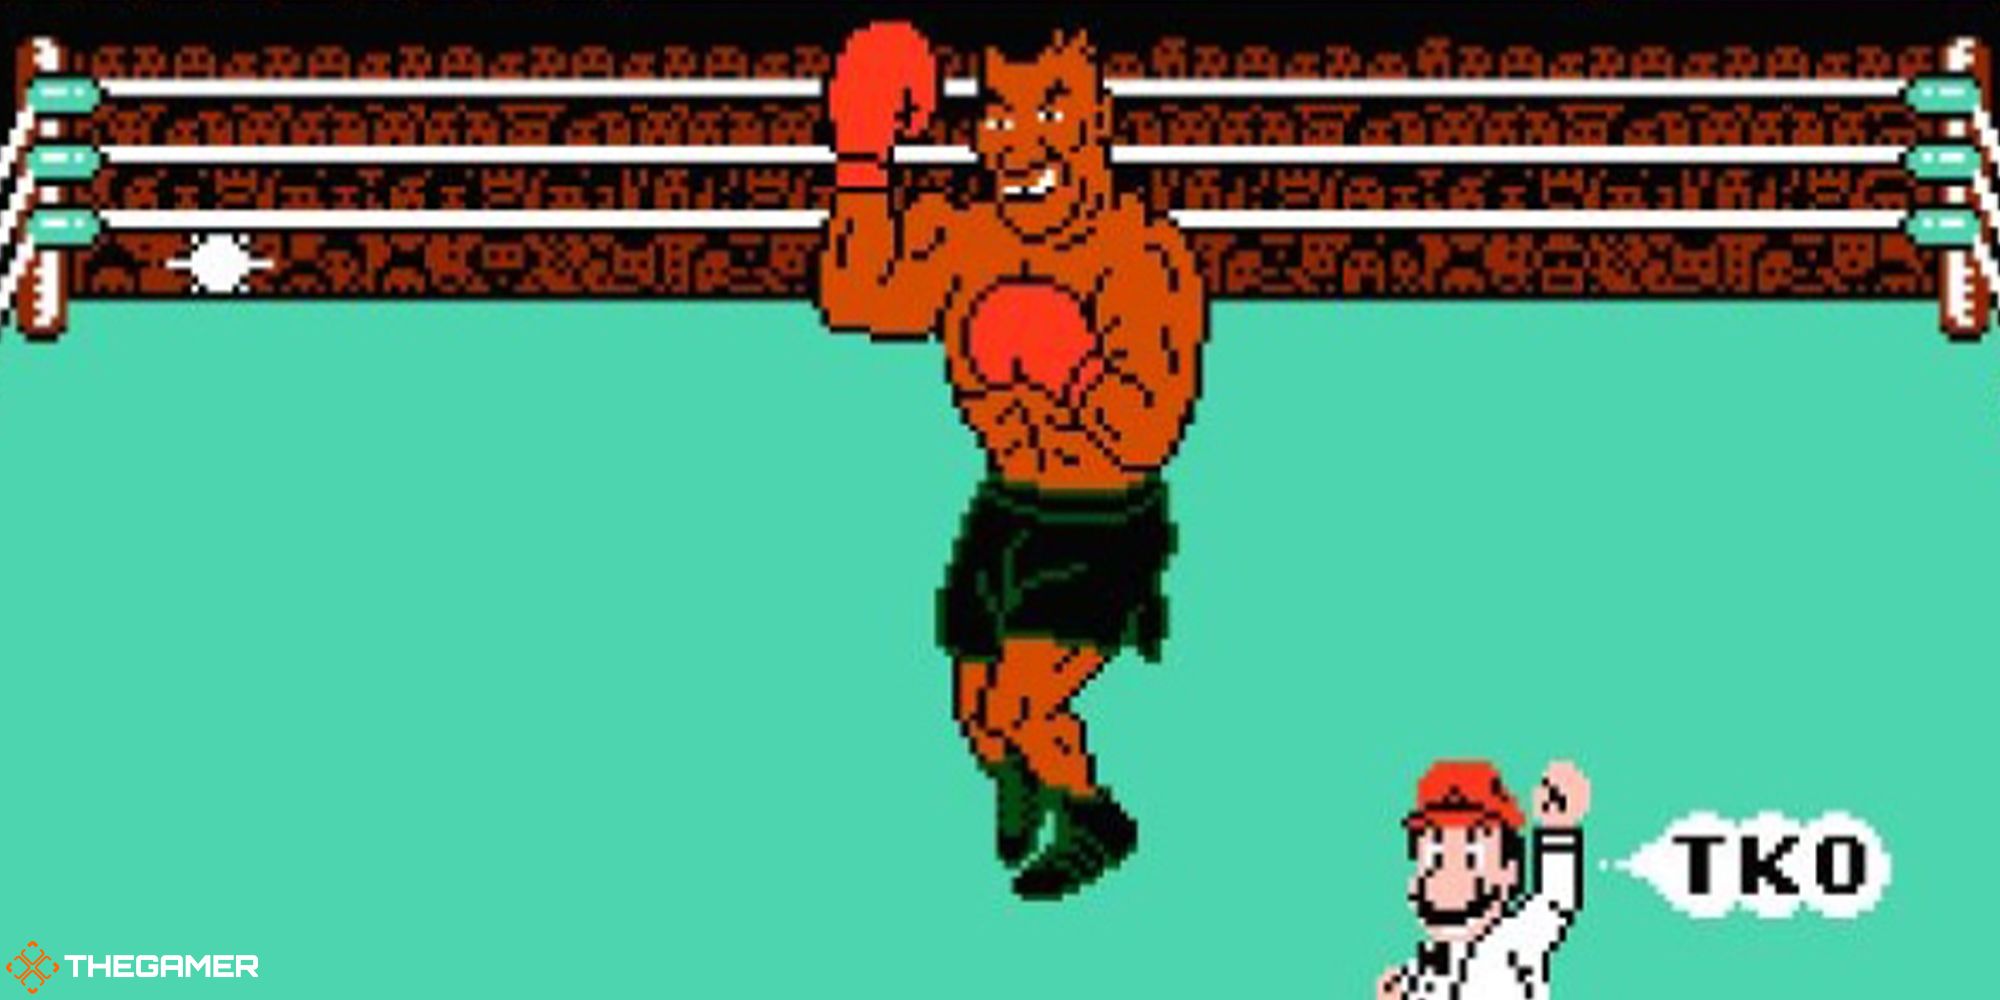 Nintendo's Punch-Out!! - Mike Tyson